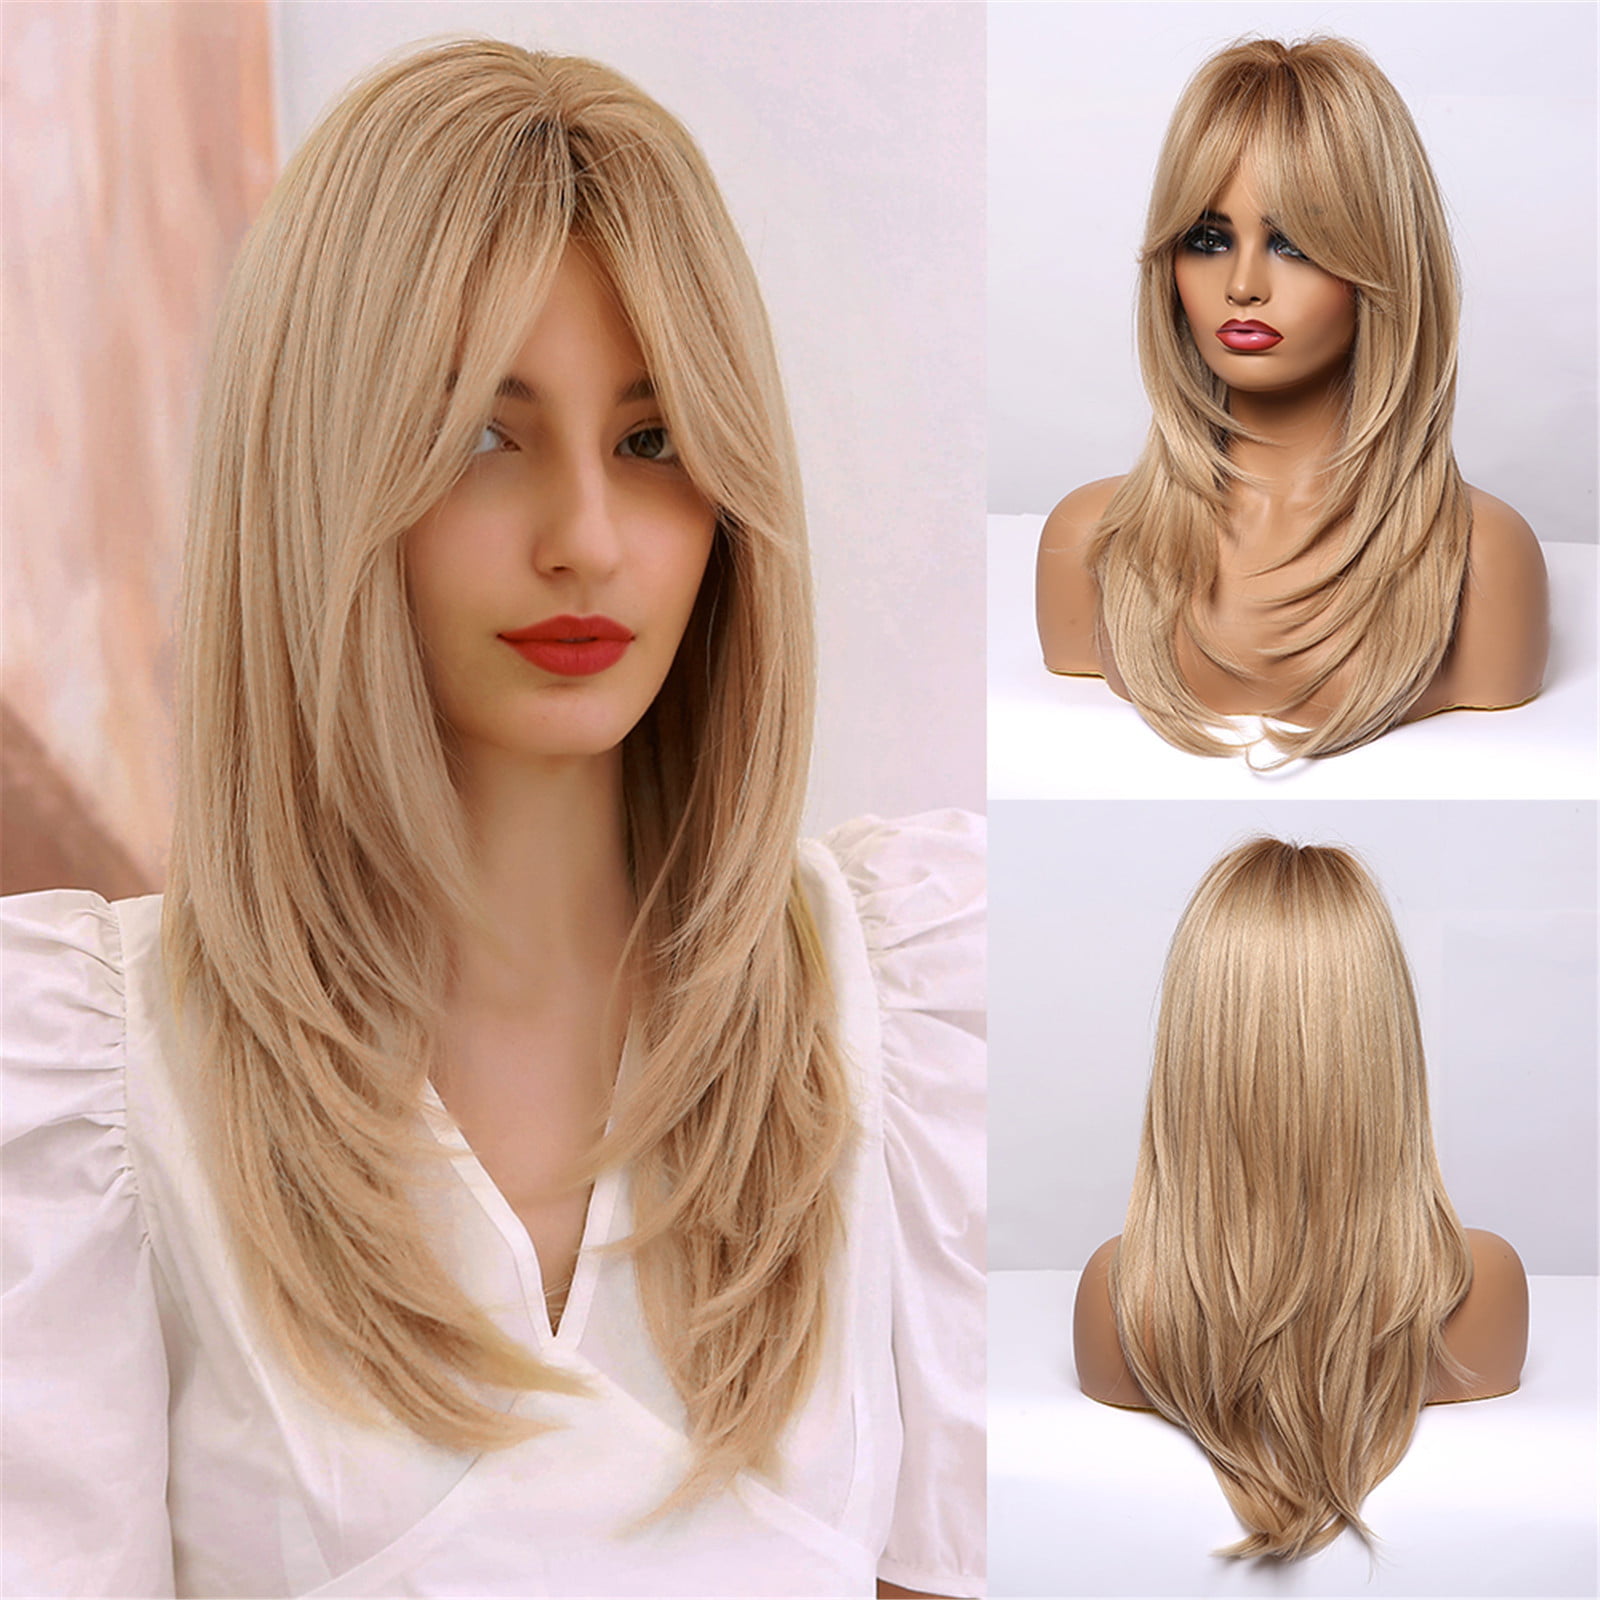 Long Wig Ombre Wig Fashion Womens Full Wig Blonde Long Straight Full Wigs Party Hair Wigs